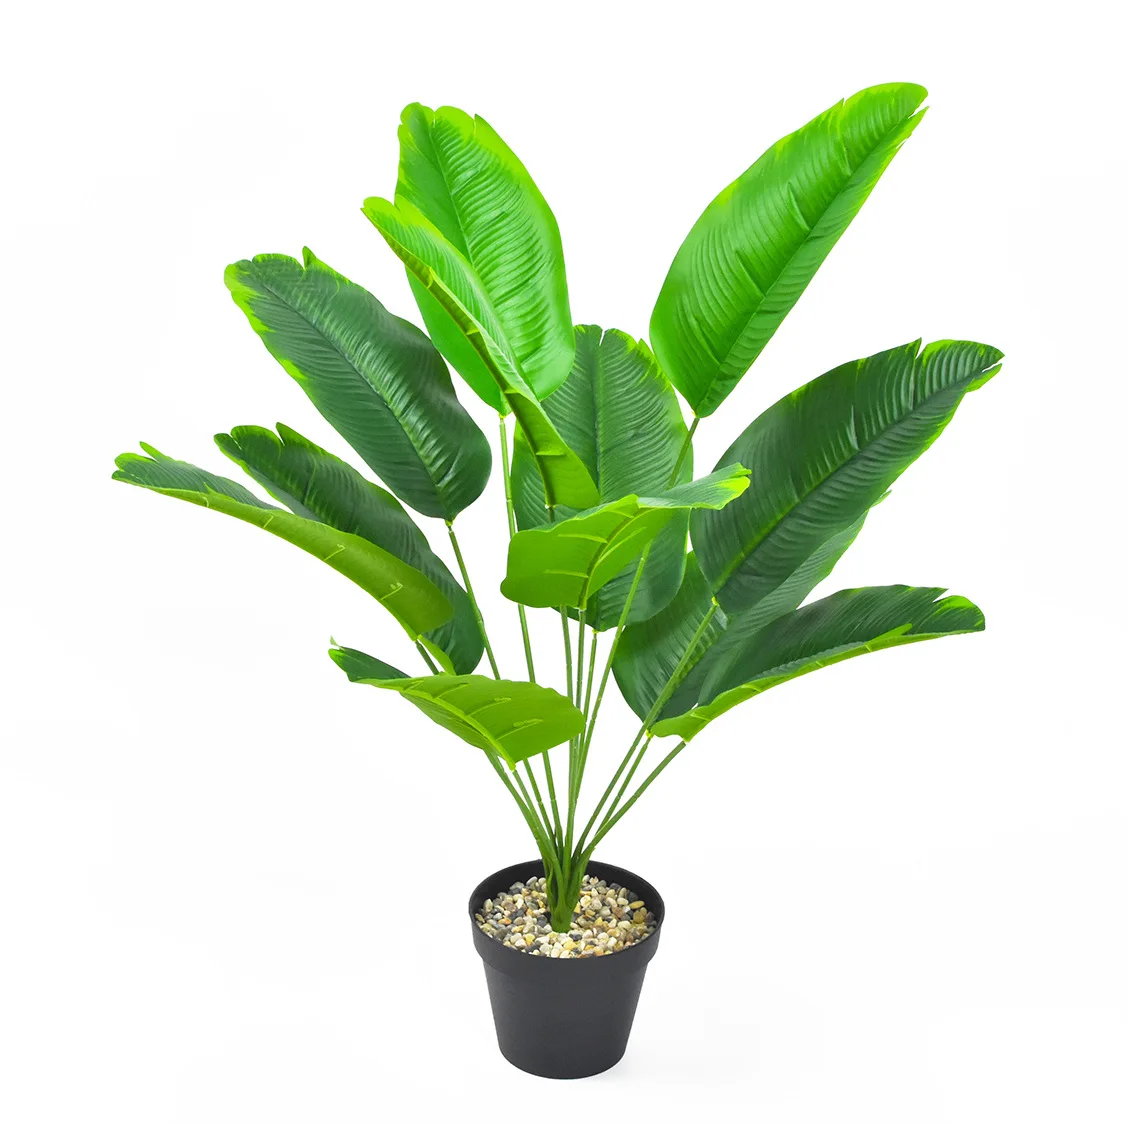 

65cm High and 12 Forks, Simulation Green Banana Leaves, High-quality Home Bonsai Decoration, Garden Crafts Creative Ornaments